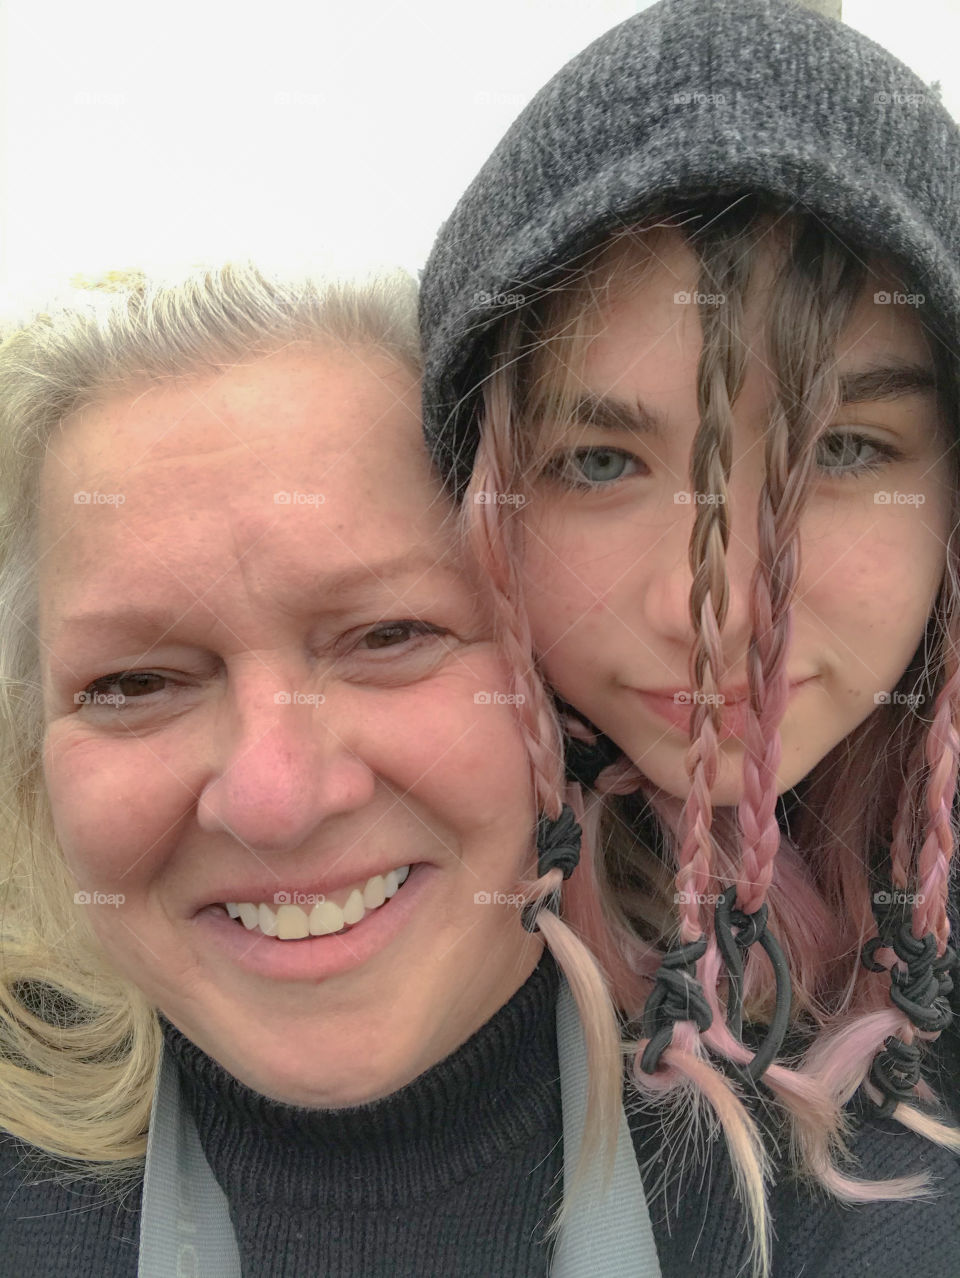 Selfie time! Selfie of my beautiful youngest daughter and myself at the dog park. It was kind of grey but not raining & all the pups, & humans had fun!